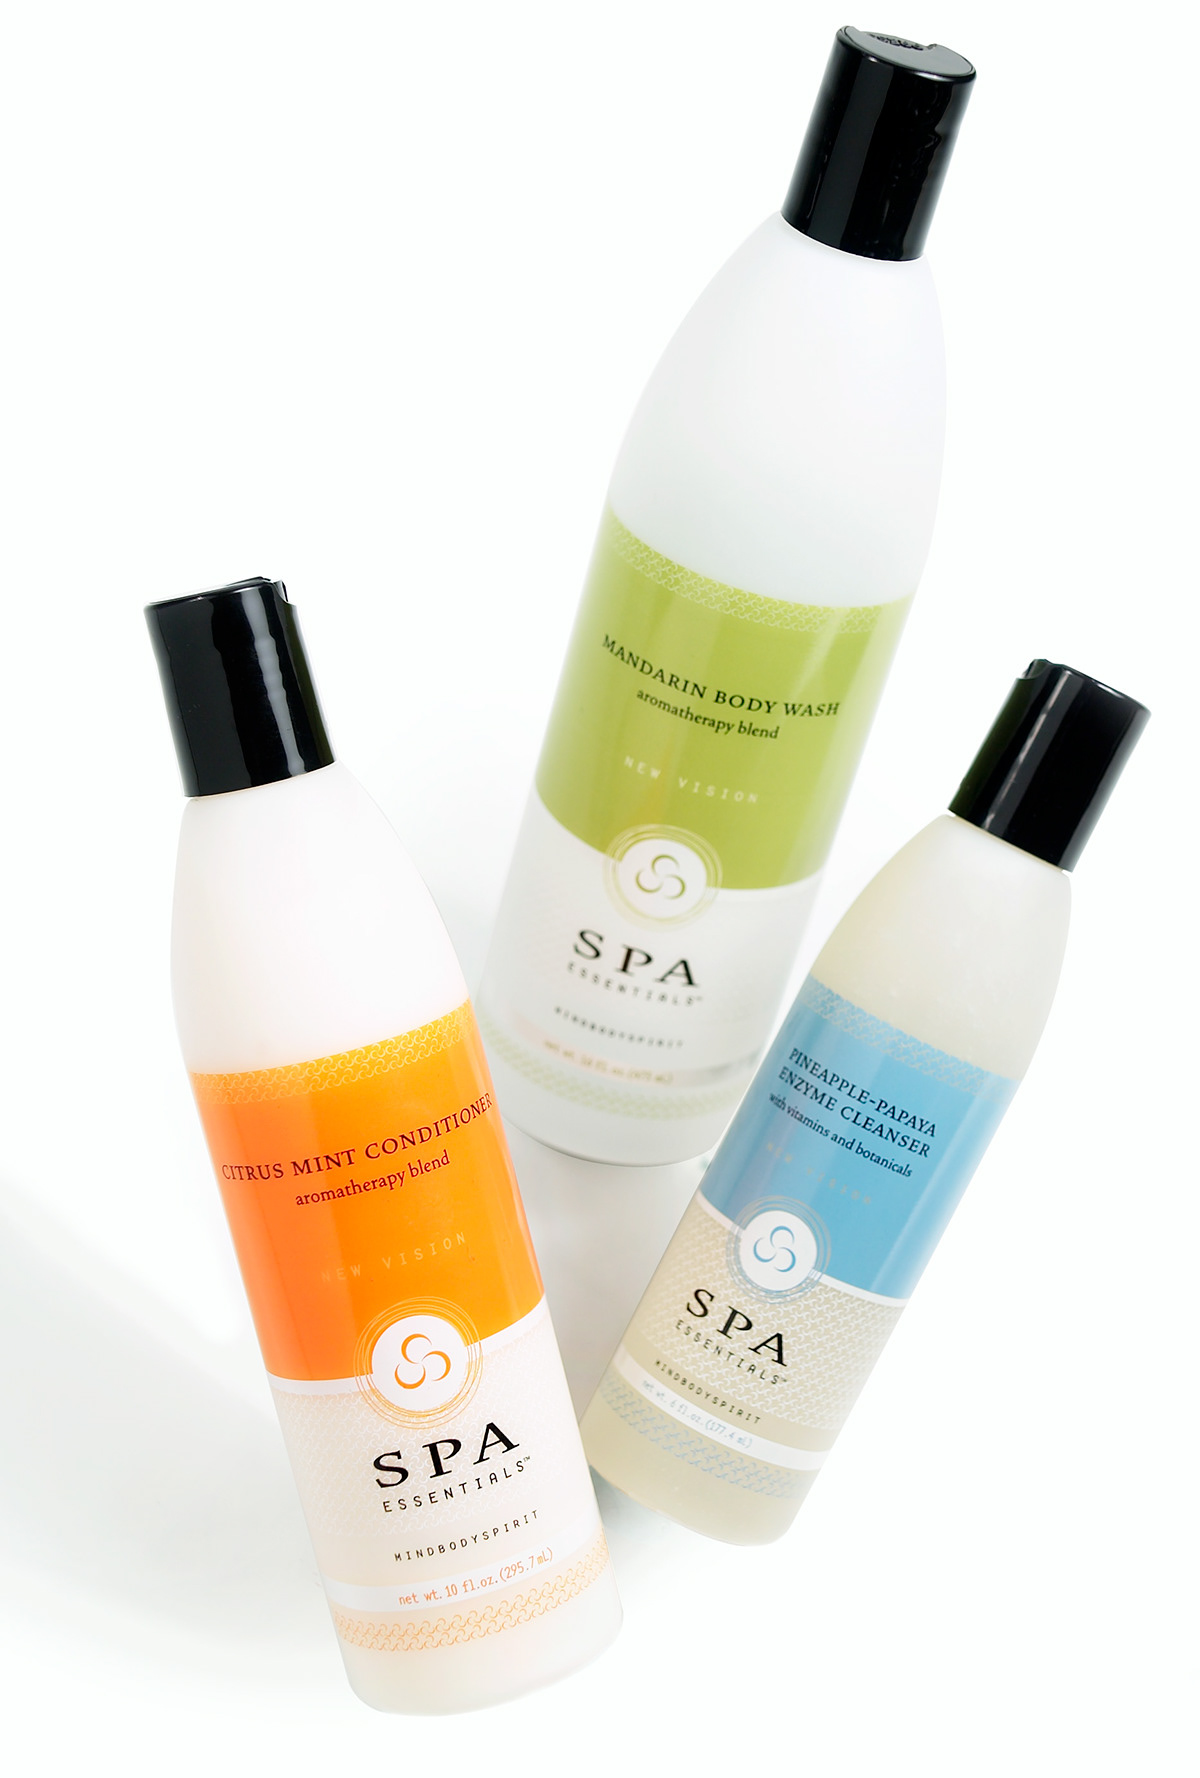 Spa Esentials spa products pattern